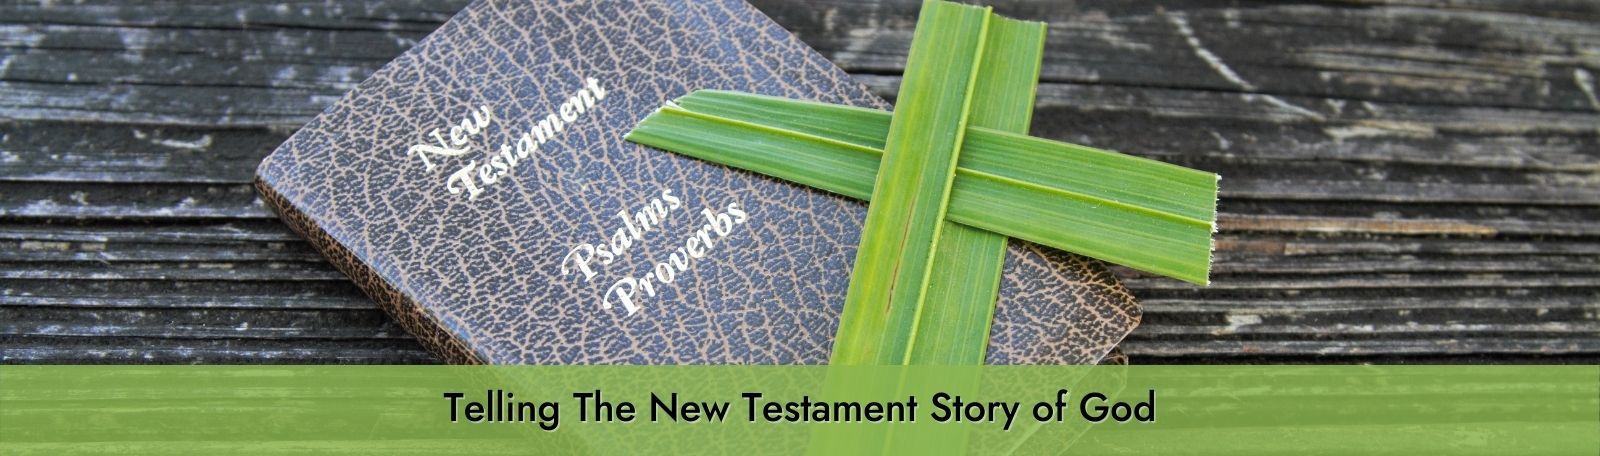 Featured image for “Telling The New Testament Story of God”